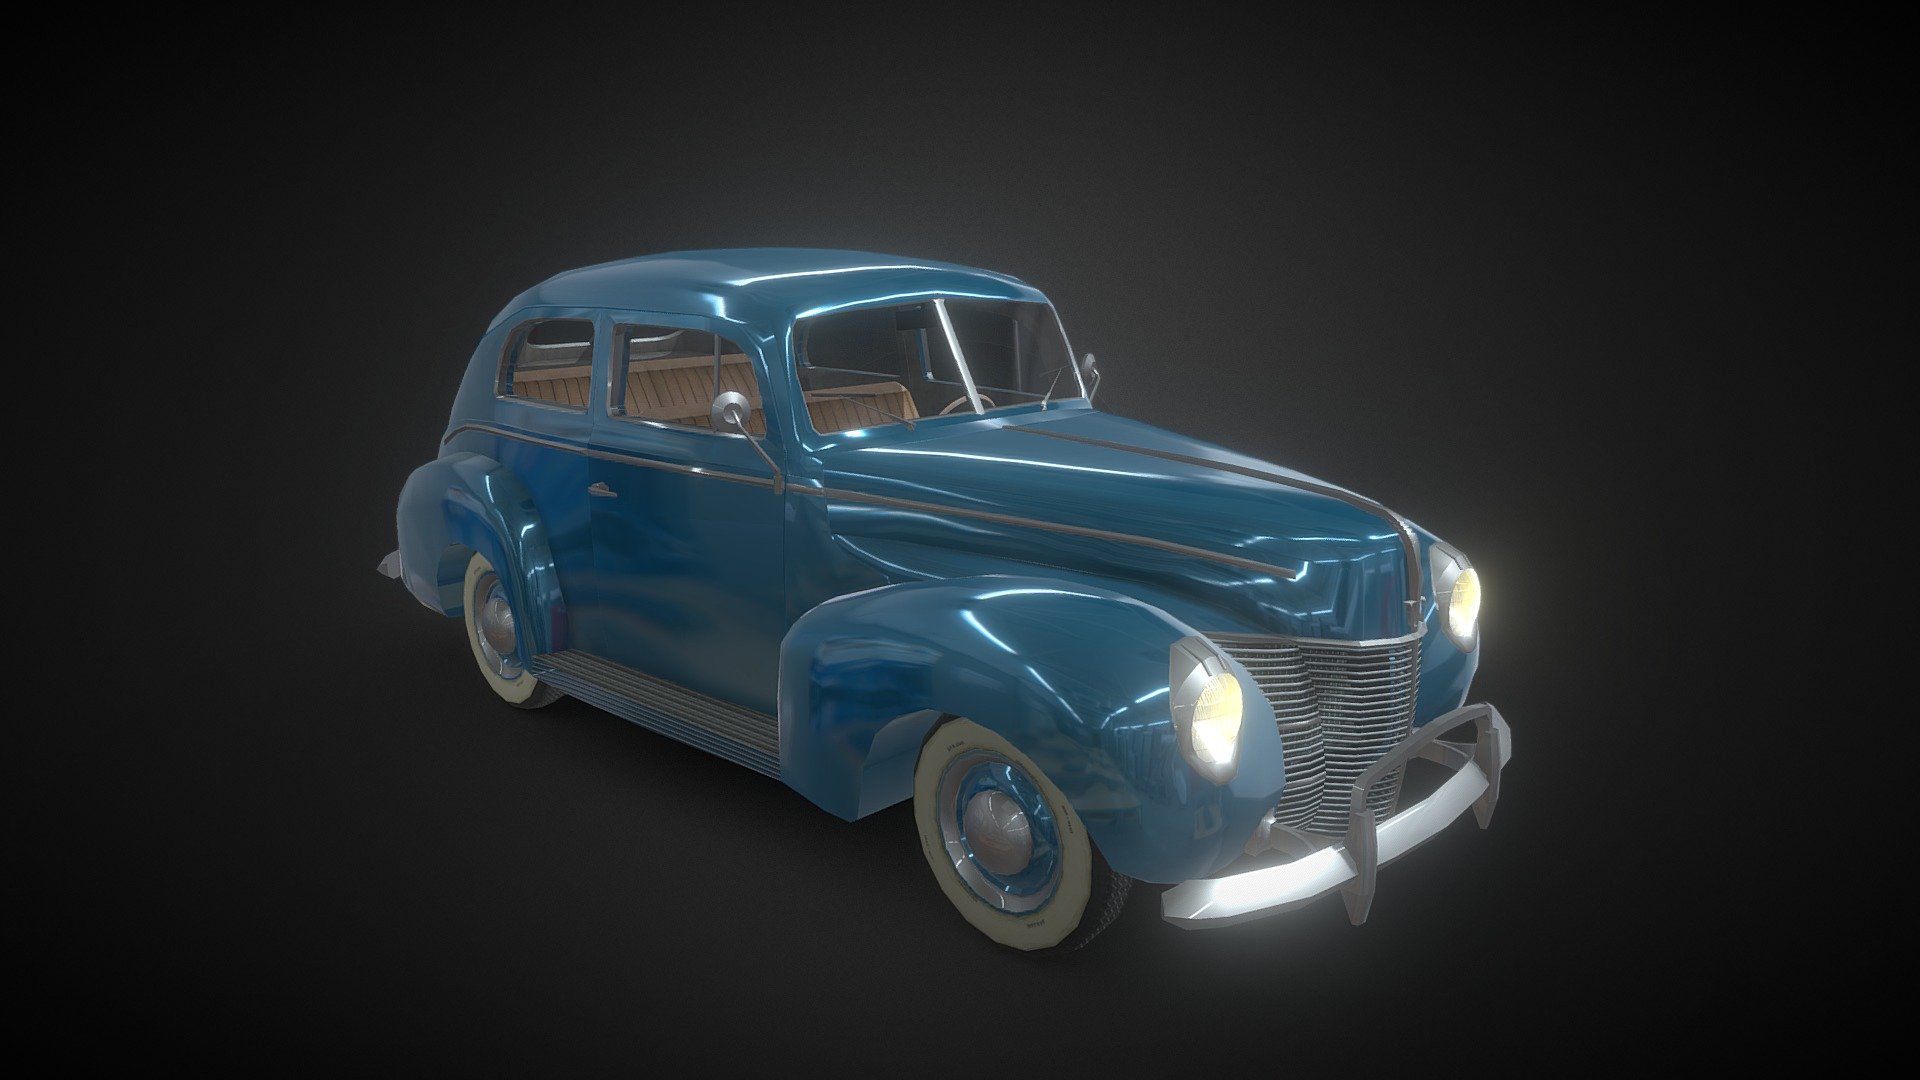 –GENERAL–

This is high quality Ford-1940 car model with complete interior and machines .(Edge loops, quad poly, simple overall structure).

Model is suitable for use in broadcast, film, presentation, cut scenes, advertising, etc.

Geometry and textures can be used in any type of 3d apps. Such as Maya, C4D, LightWave, Marmoset and current gen game engines (tested in Unity5, UnrealEengine4, and CryEngine) However, it does not mean that product includes full asset or project files for Unity, UE4 etc. You will need to import assets by yourself. It only means that geometry is ‘clean’ and it runs on everything without errors and bugs.

(MODAL IS TESTED IN DIFFRENT SOFTWARE (UNITY, MUDBOX, MAYA, 3DS MAX, KEYSHORT, ETC.)

Note: this is my old work on vintage car model for practicing of car modeling and texturing task 3d model